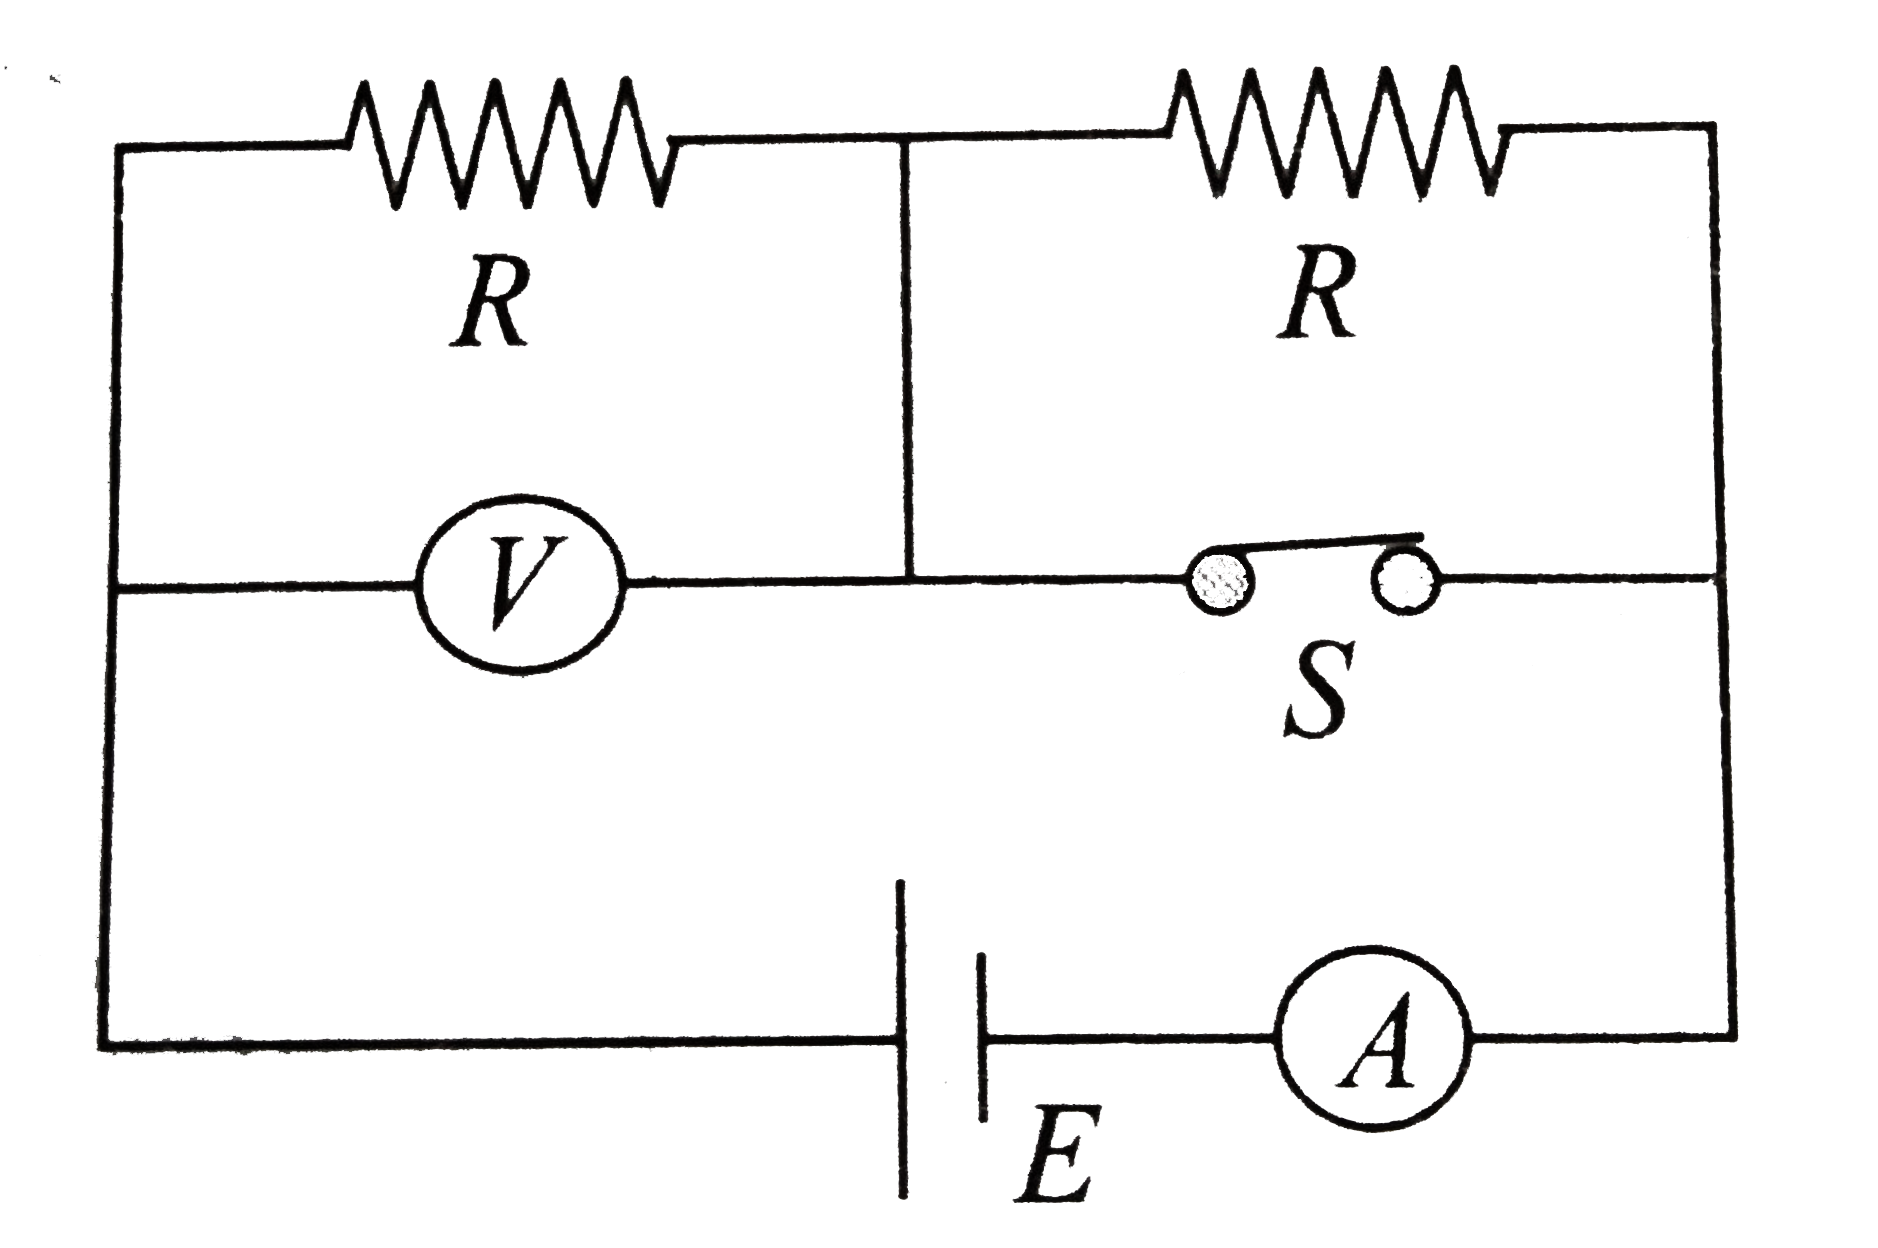 In the circuit shown, battery, ammeter , and voltmeter are ideal and the switch S is initially closed as shown. When switch S is opened